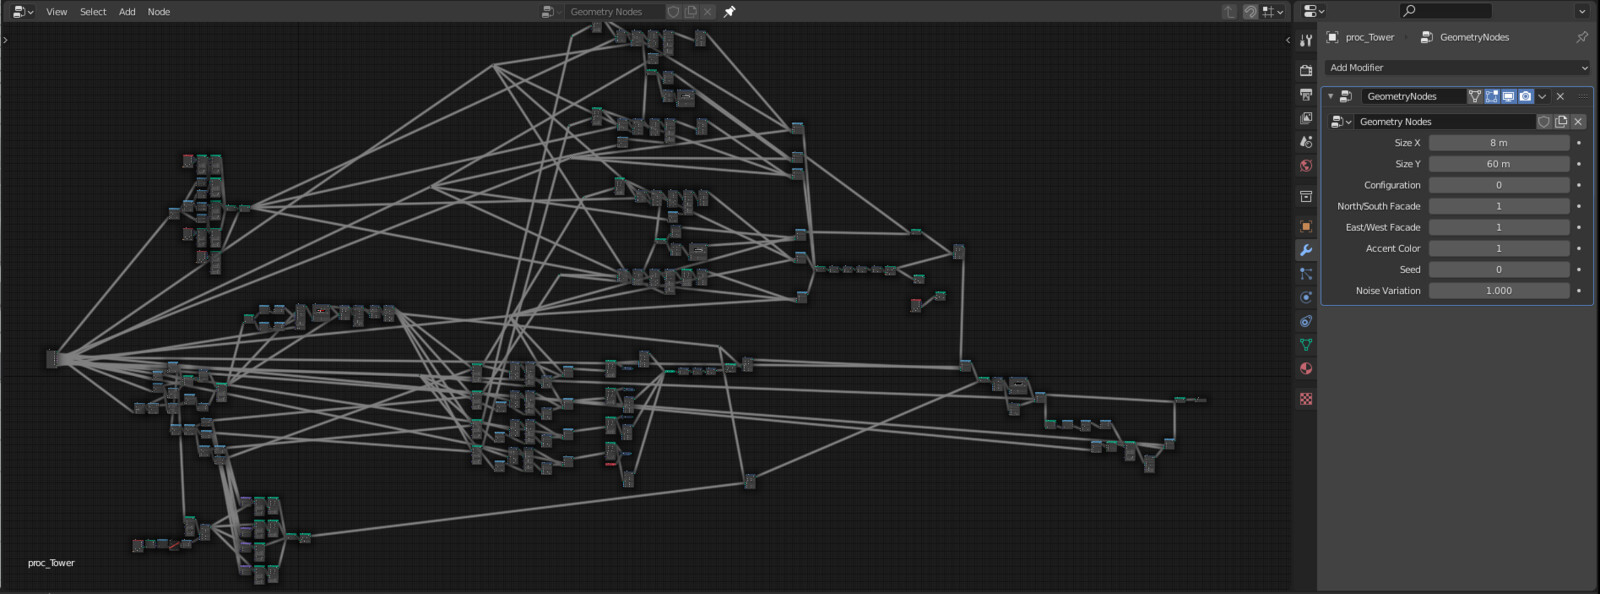 Snapshot of the network and controls using Blender's geometry nodes.